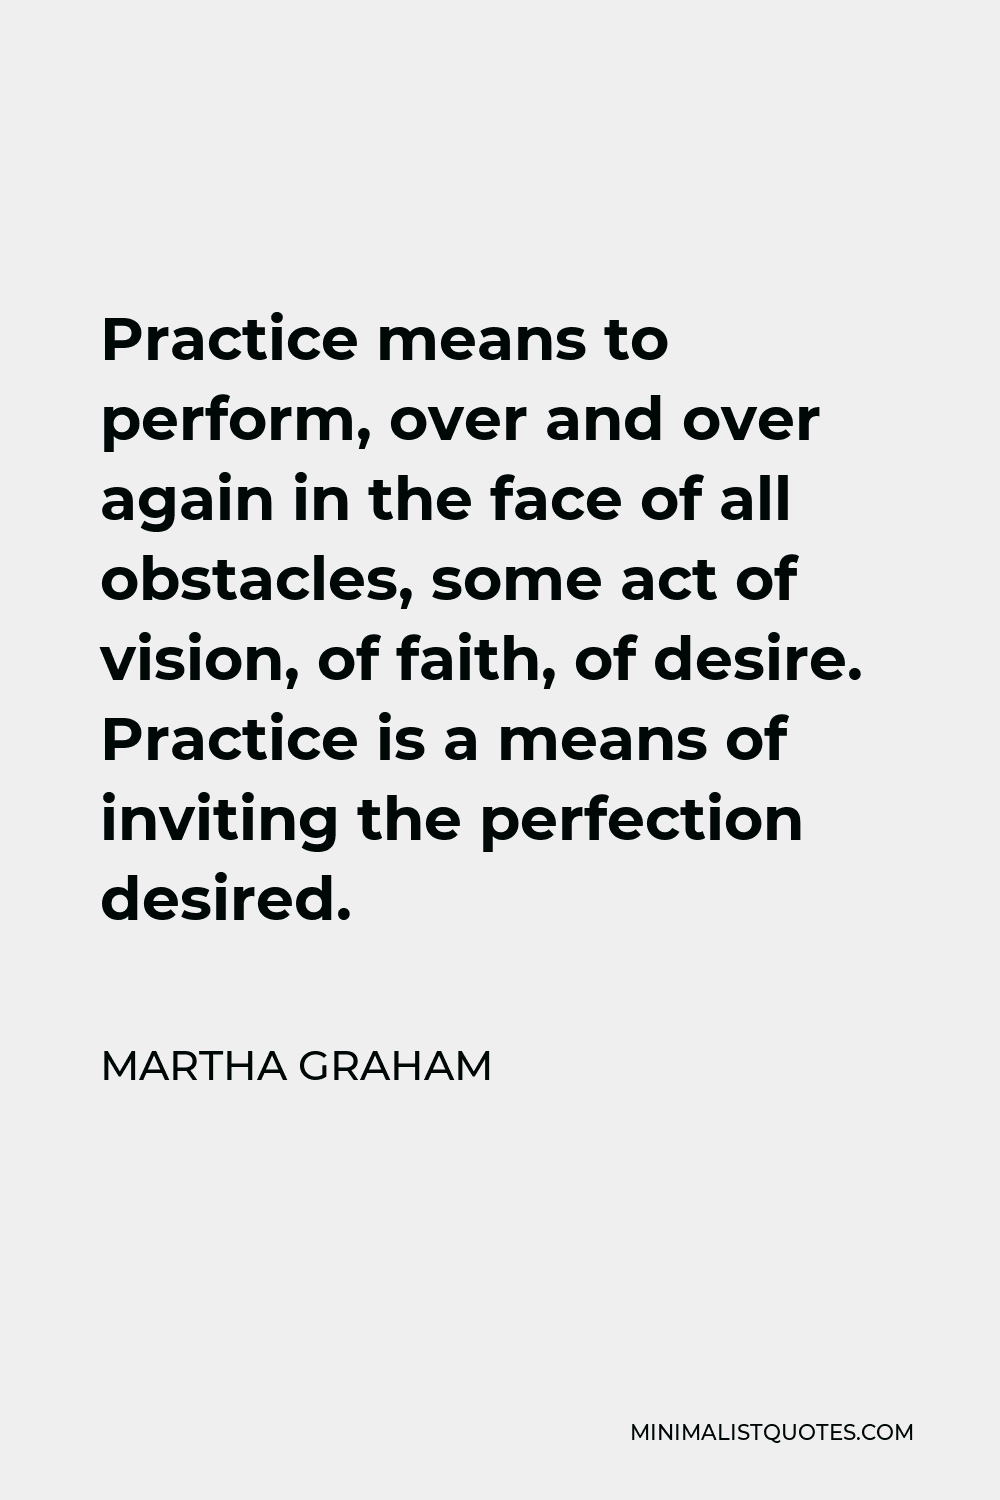 Martha Graham Quote - Practice means to perform, over and over again in the face of all obstacles, some act of vision, of faith, of desire. Practice is a means of inviting the perfection desired.